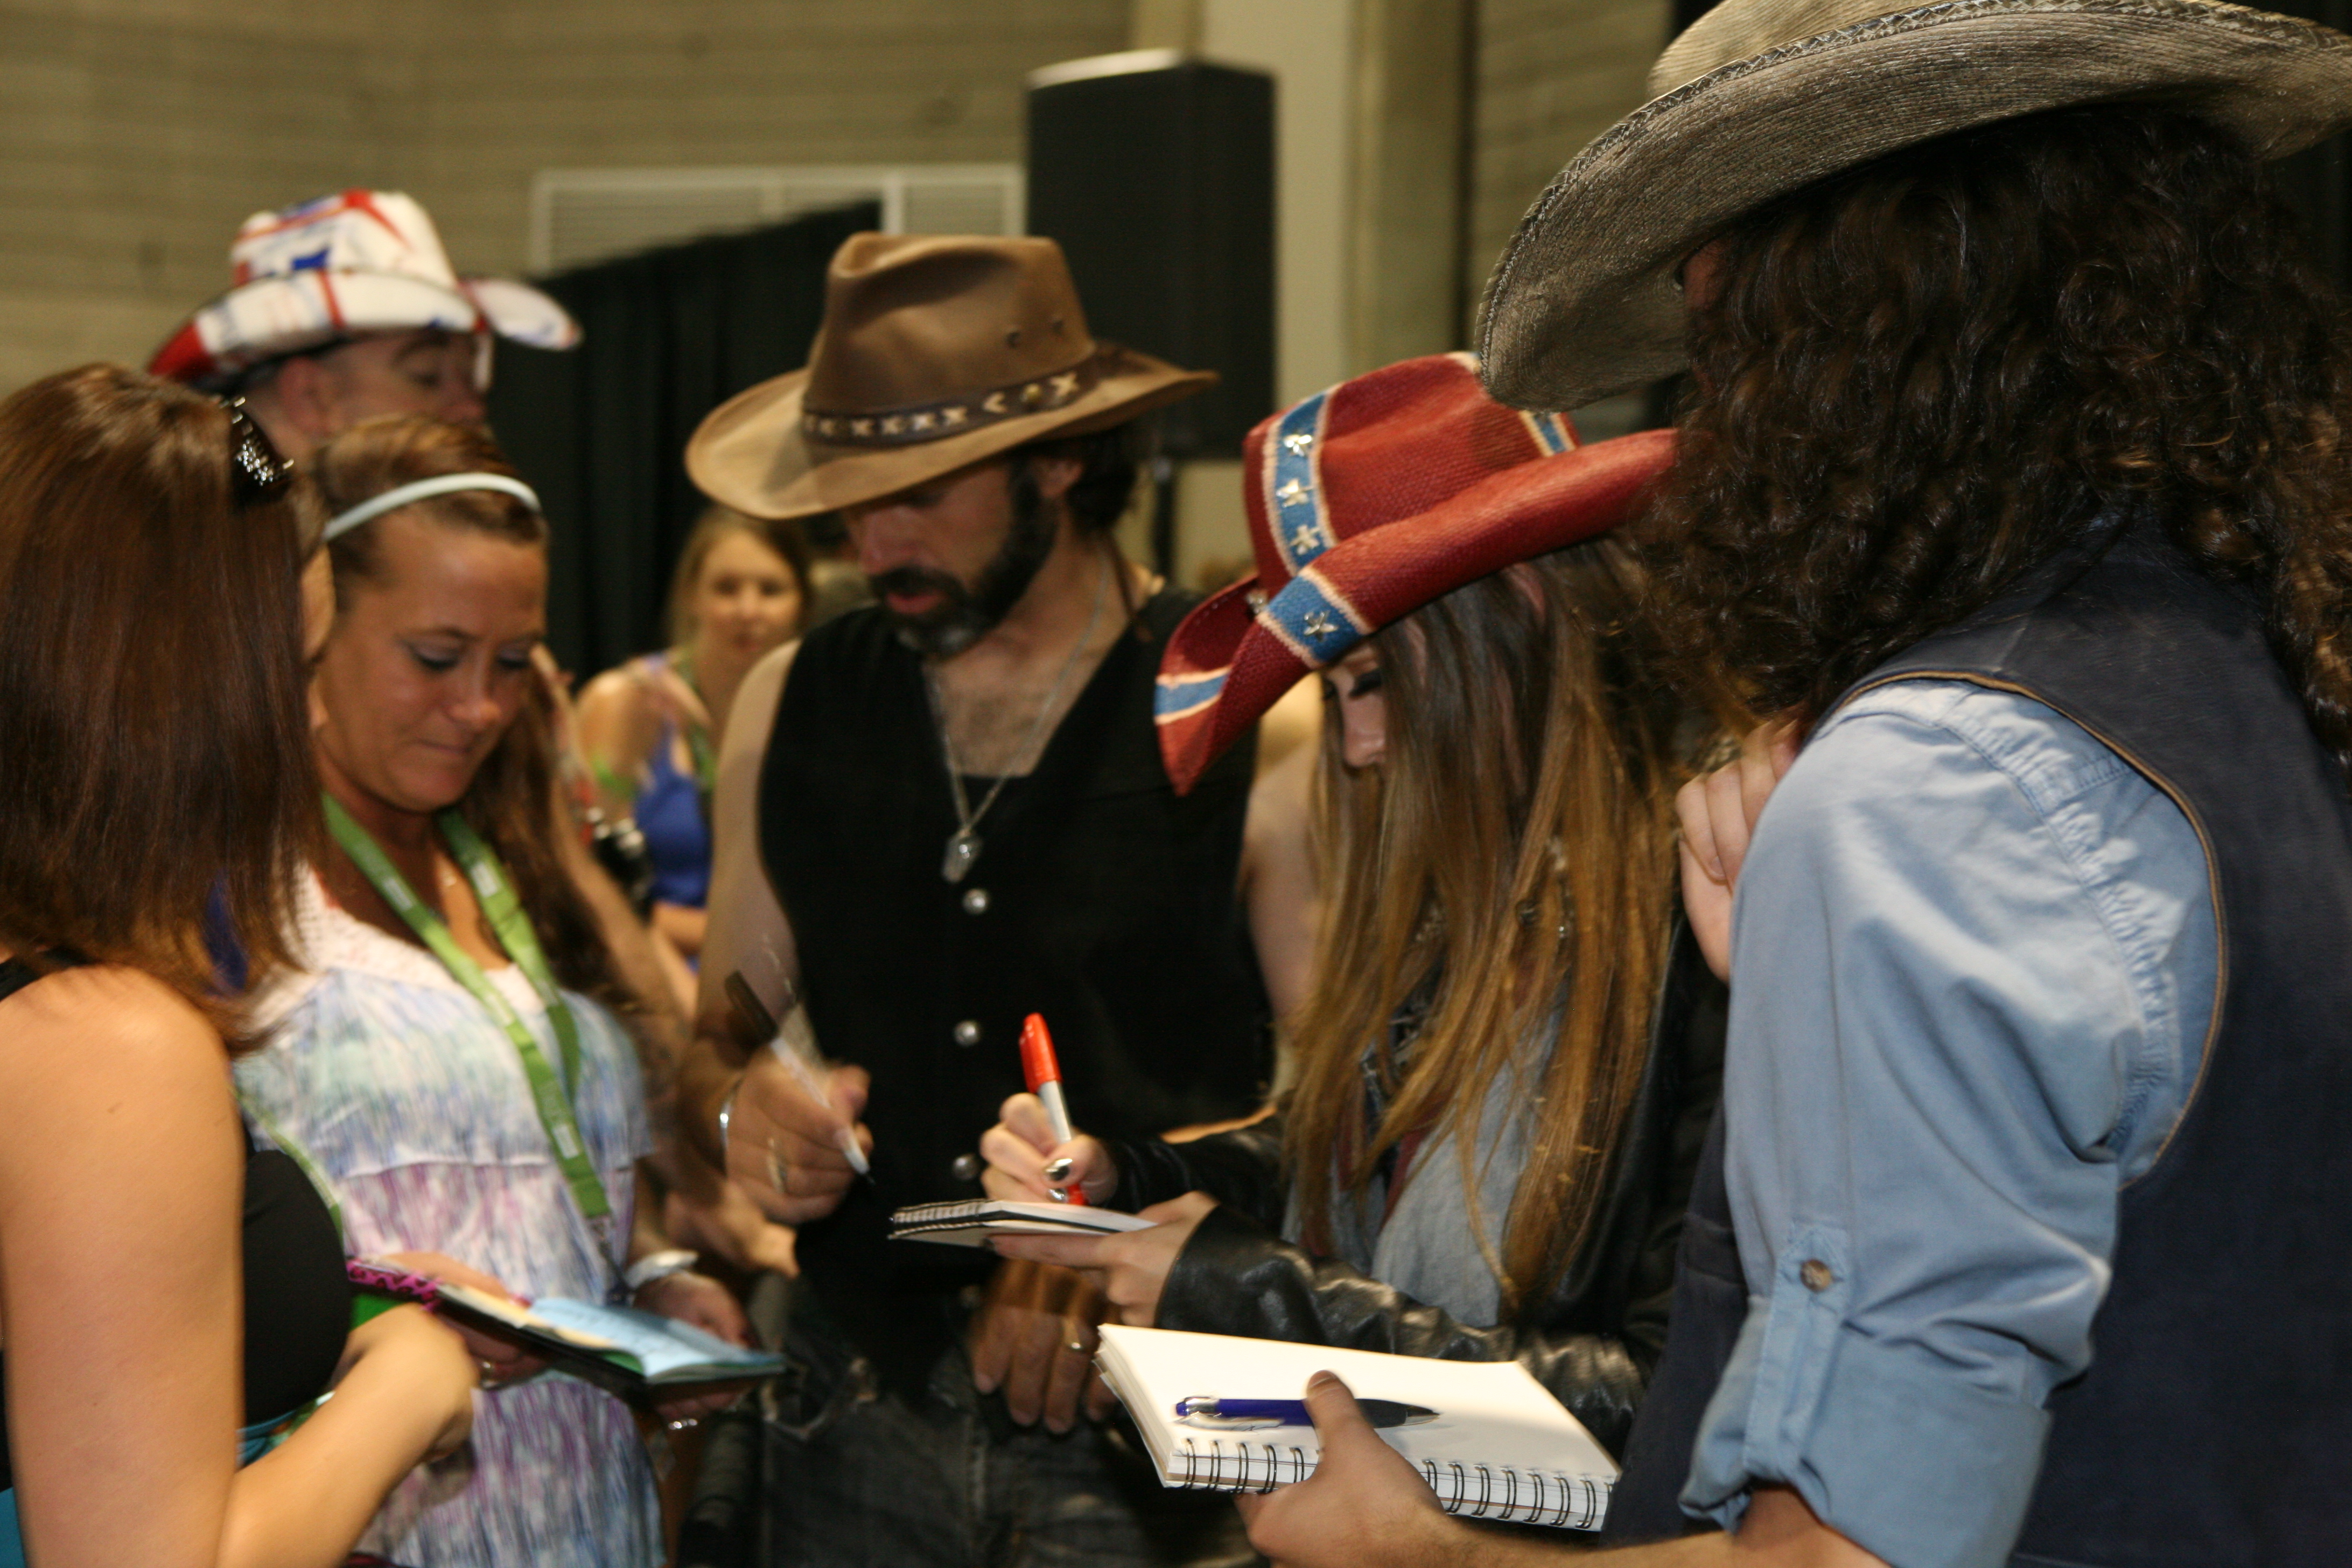 Angel Mary & the Tennessee Werewolves signing autographs at Fan Fair CMA FEST